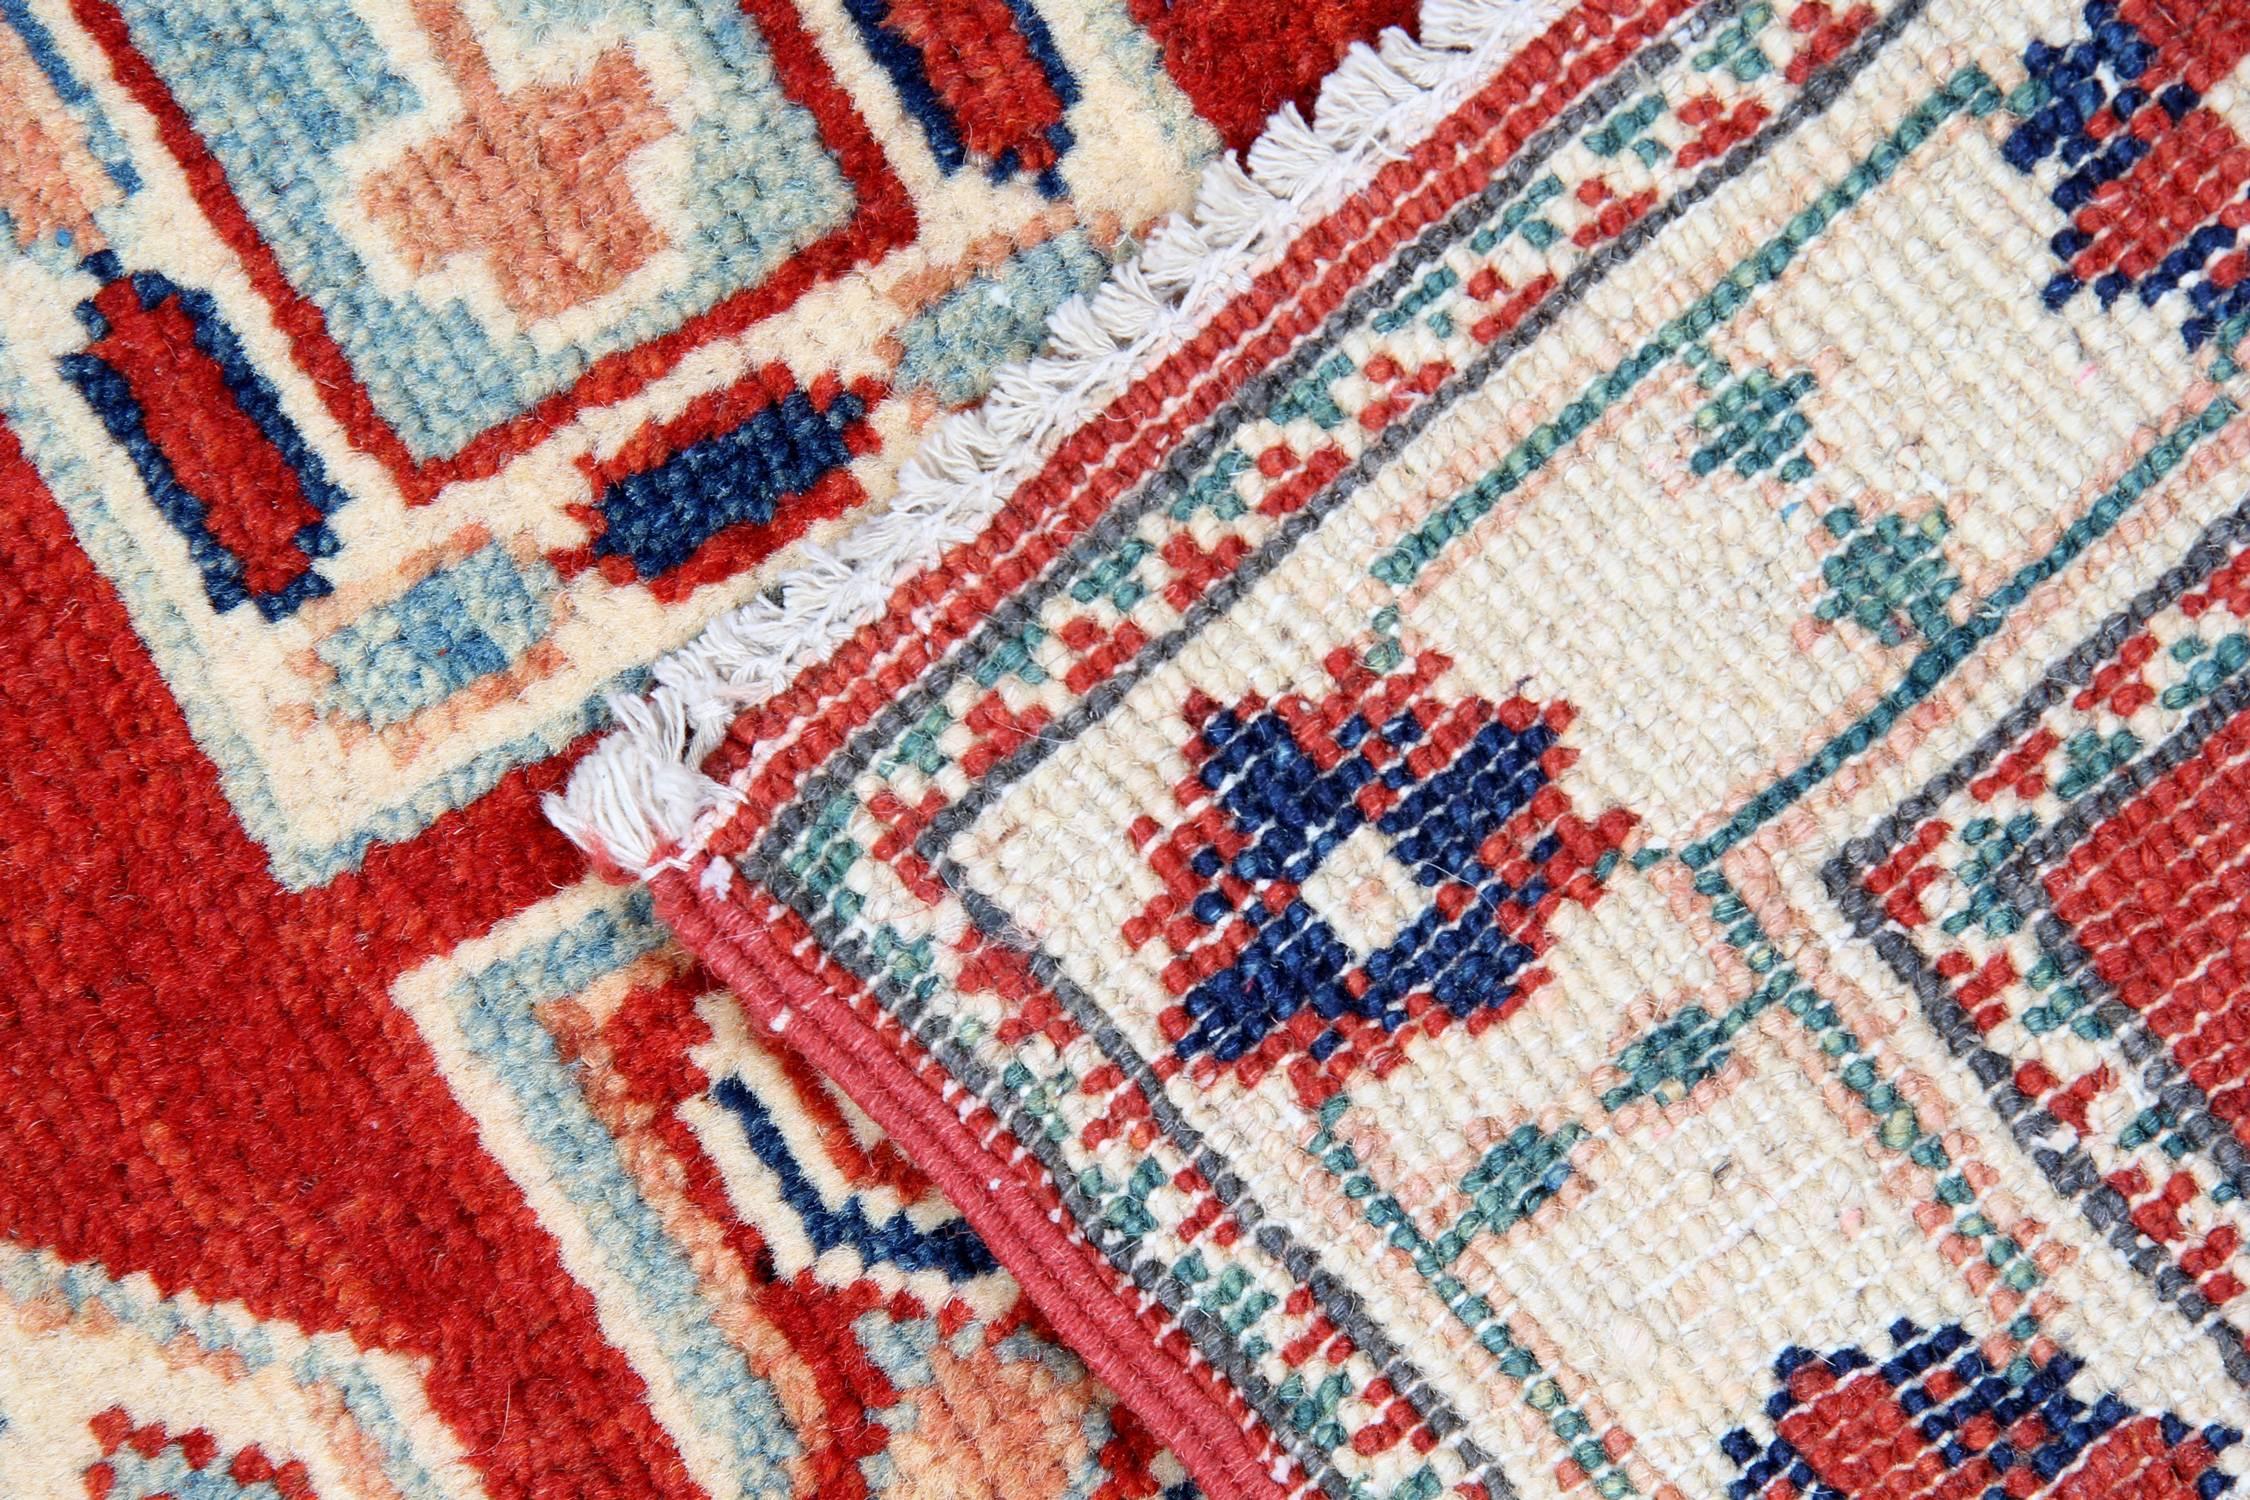 Hand-Knotted Small Kazak Rugs, Geometric Carpet Red Door Mat Primitive Rustic Rug 65x93cm  For Sale